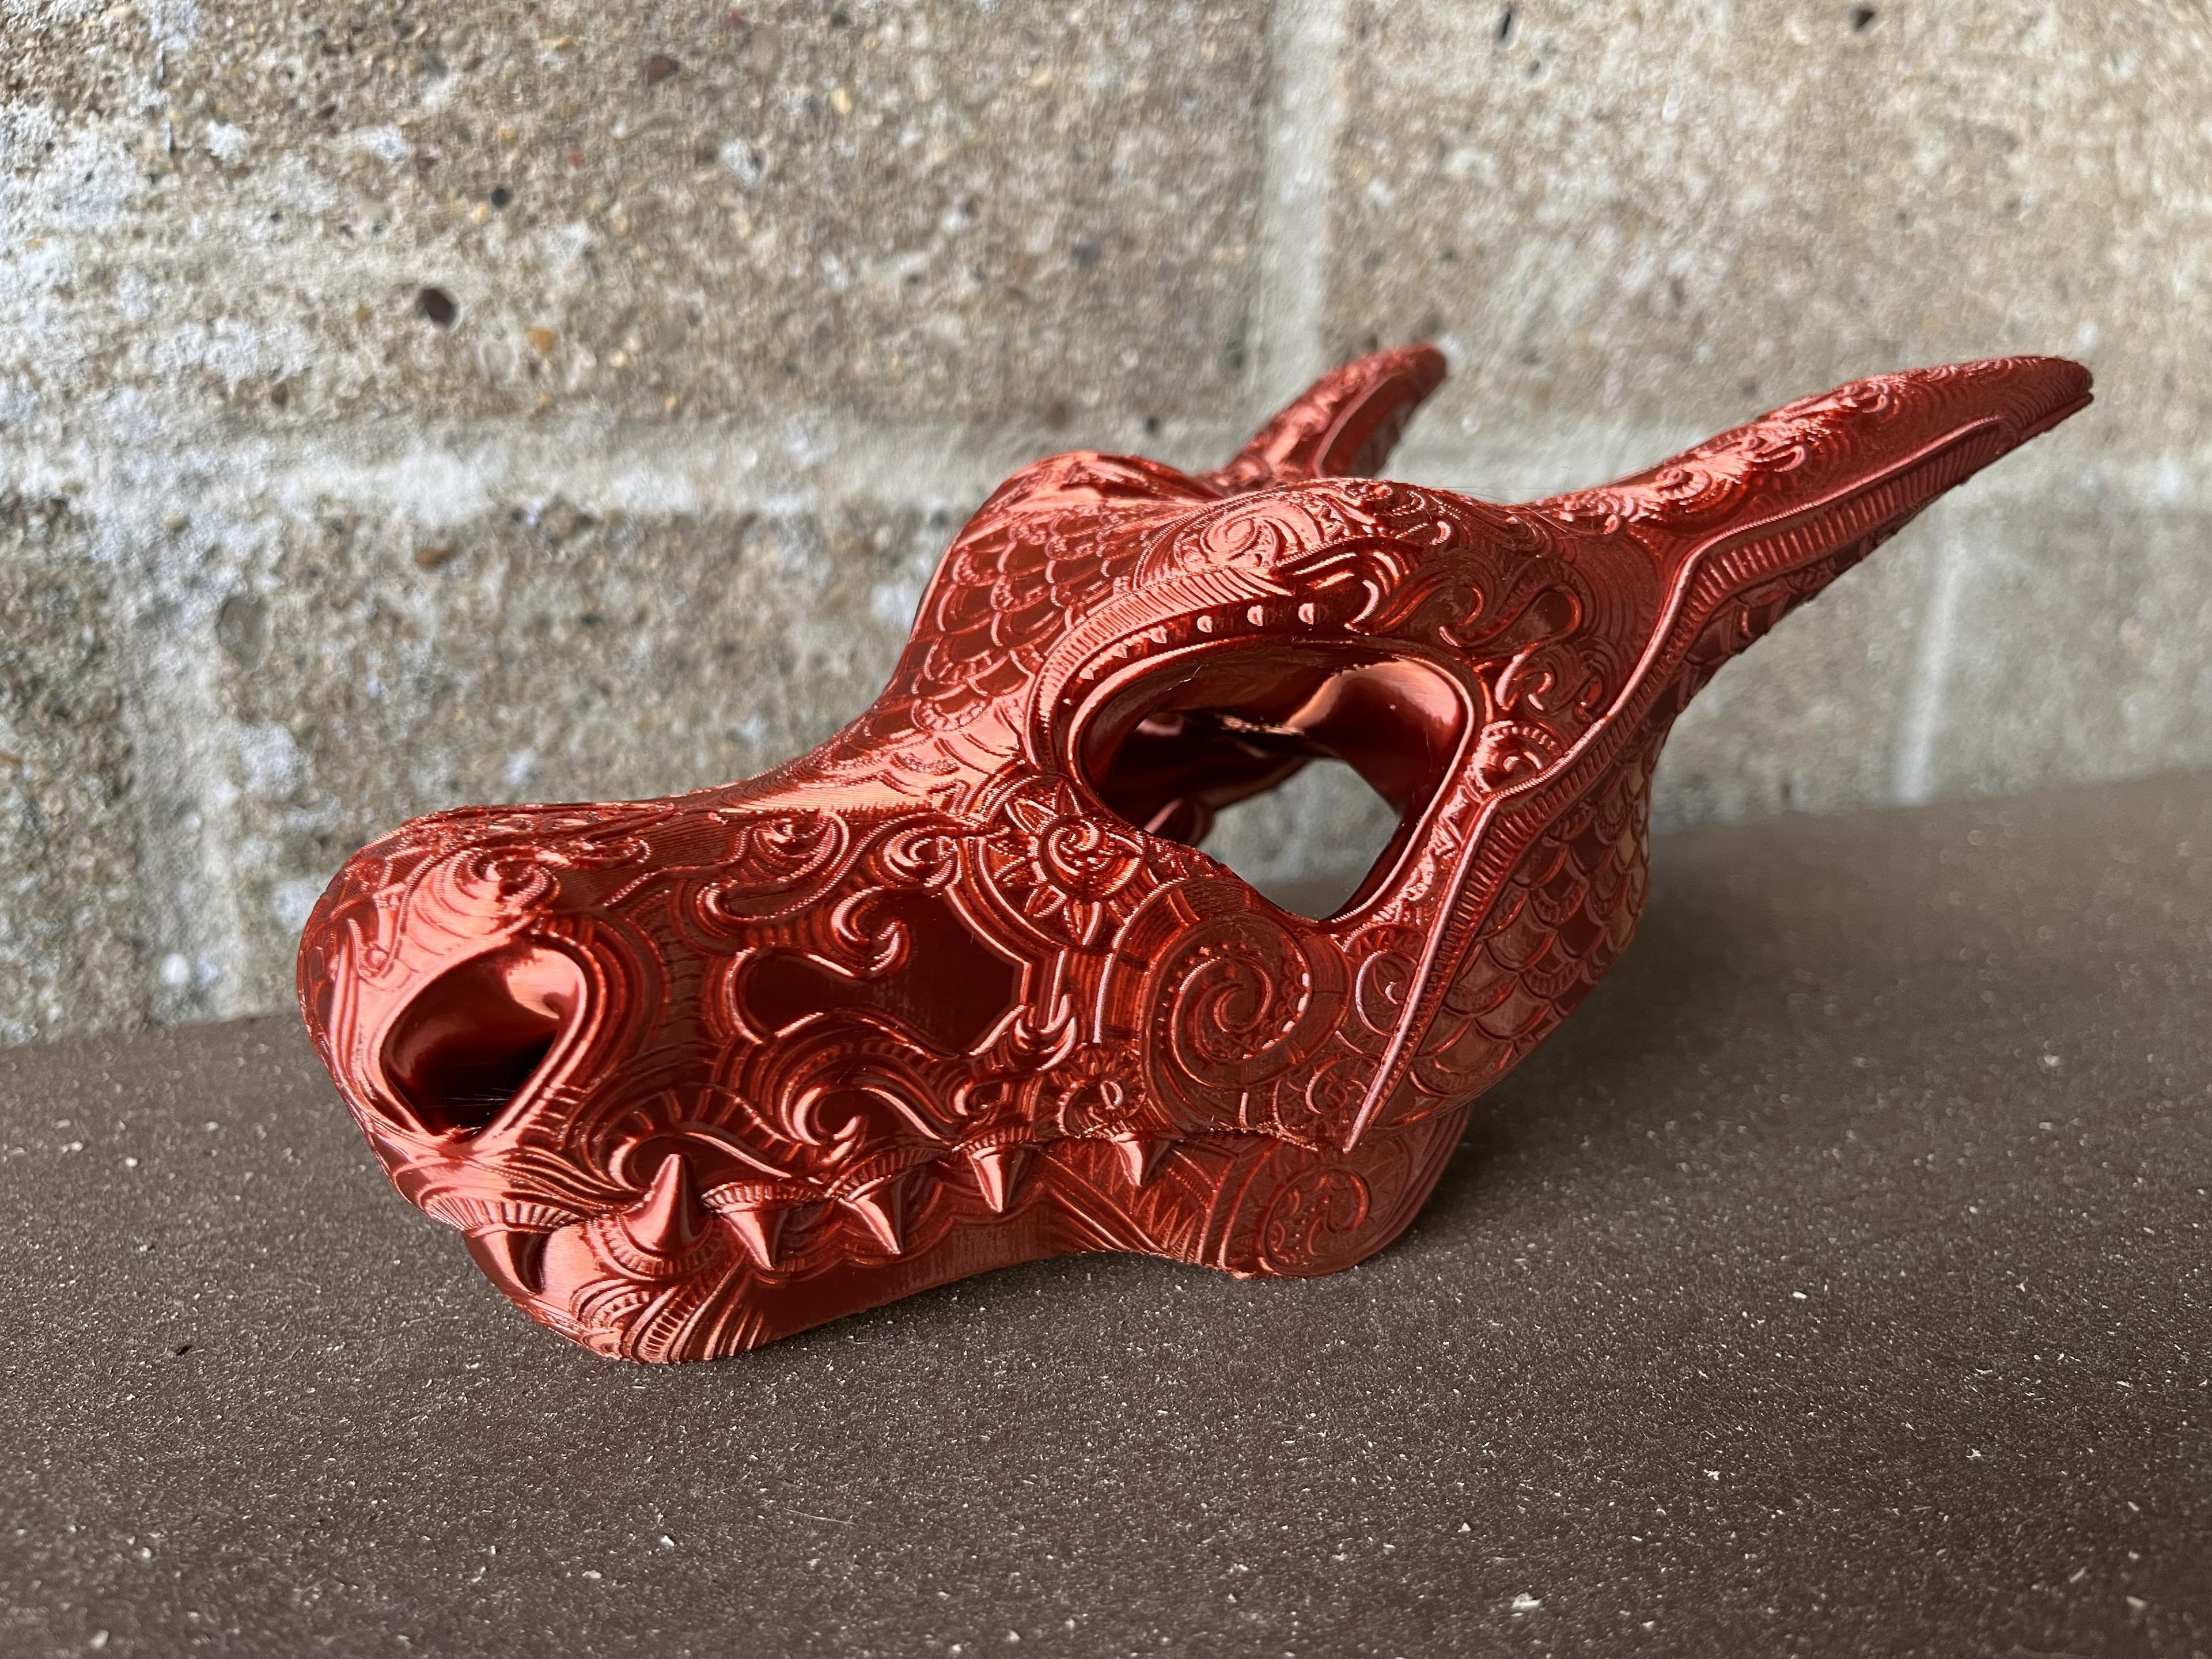 Ornate Charizard Skull (Pokémon) - I saw this after printing the Cubone and had to try this one too. Printed at 0.15mm layer height on Prusa Mini with supports on build plate. Just barely fit at 100%. Used Polyalchemy Copper Elixir PLA. - 3d model